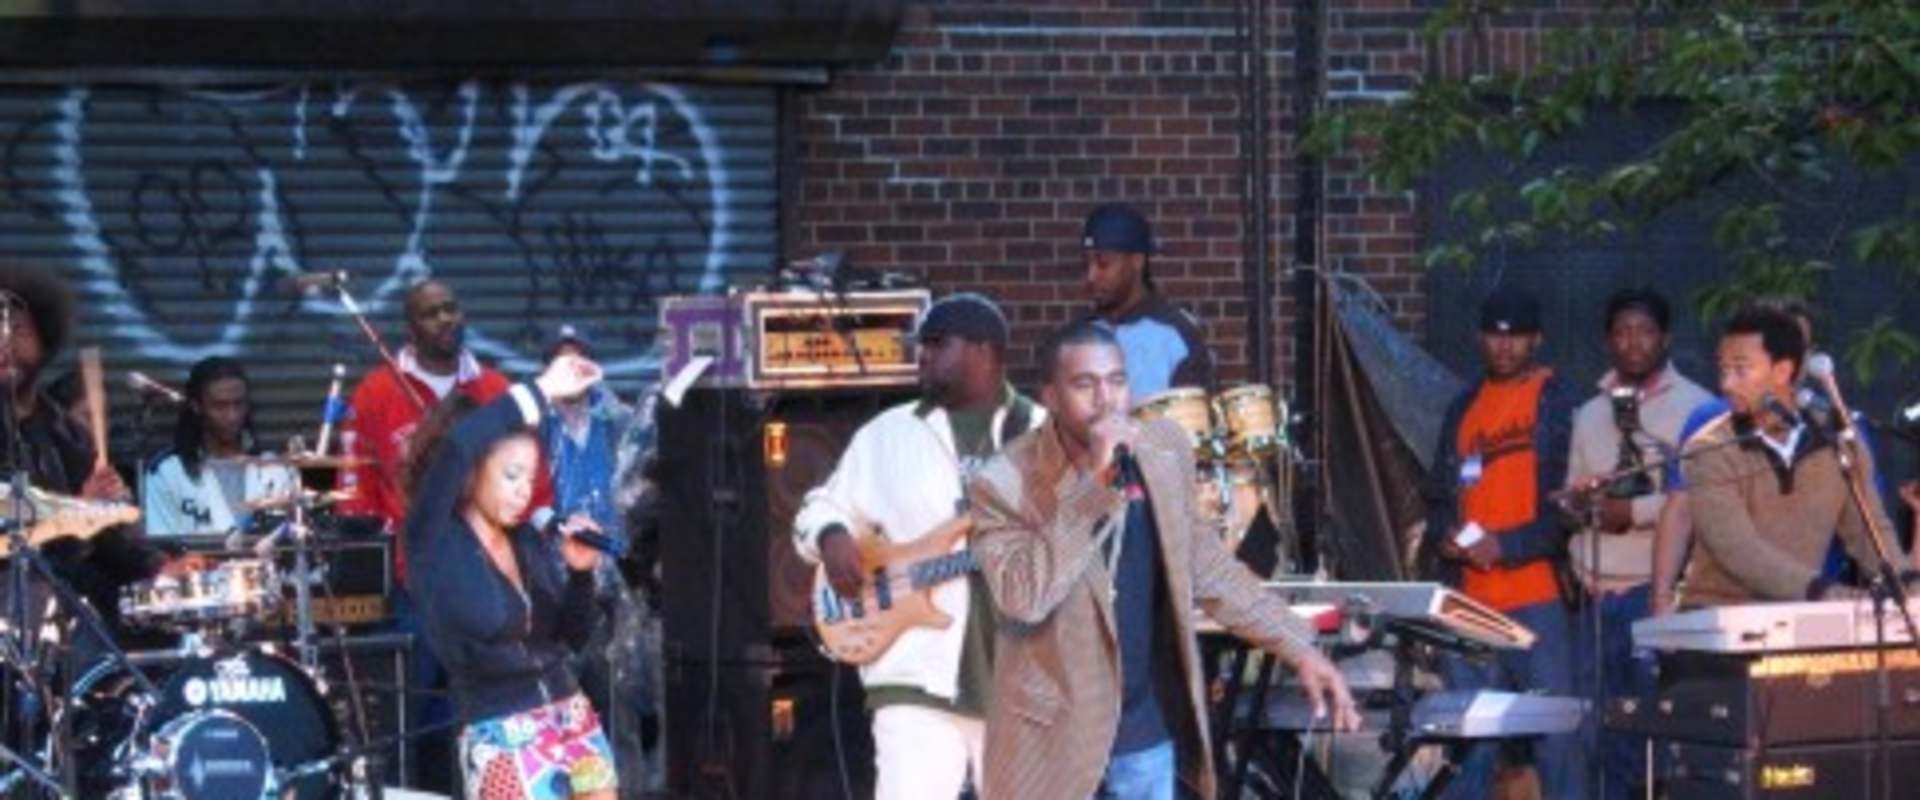 Dave Chappelle's Block Party background 2